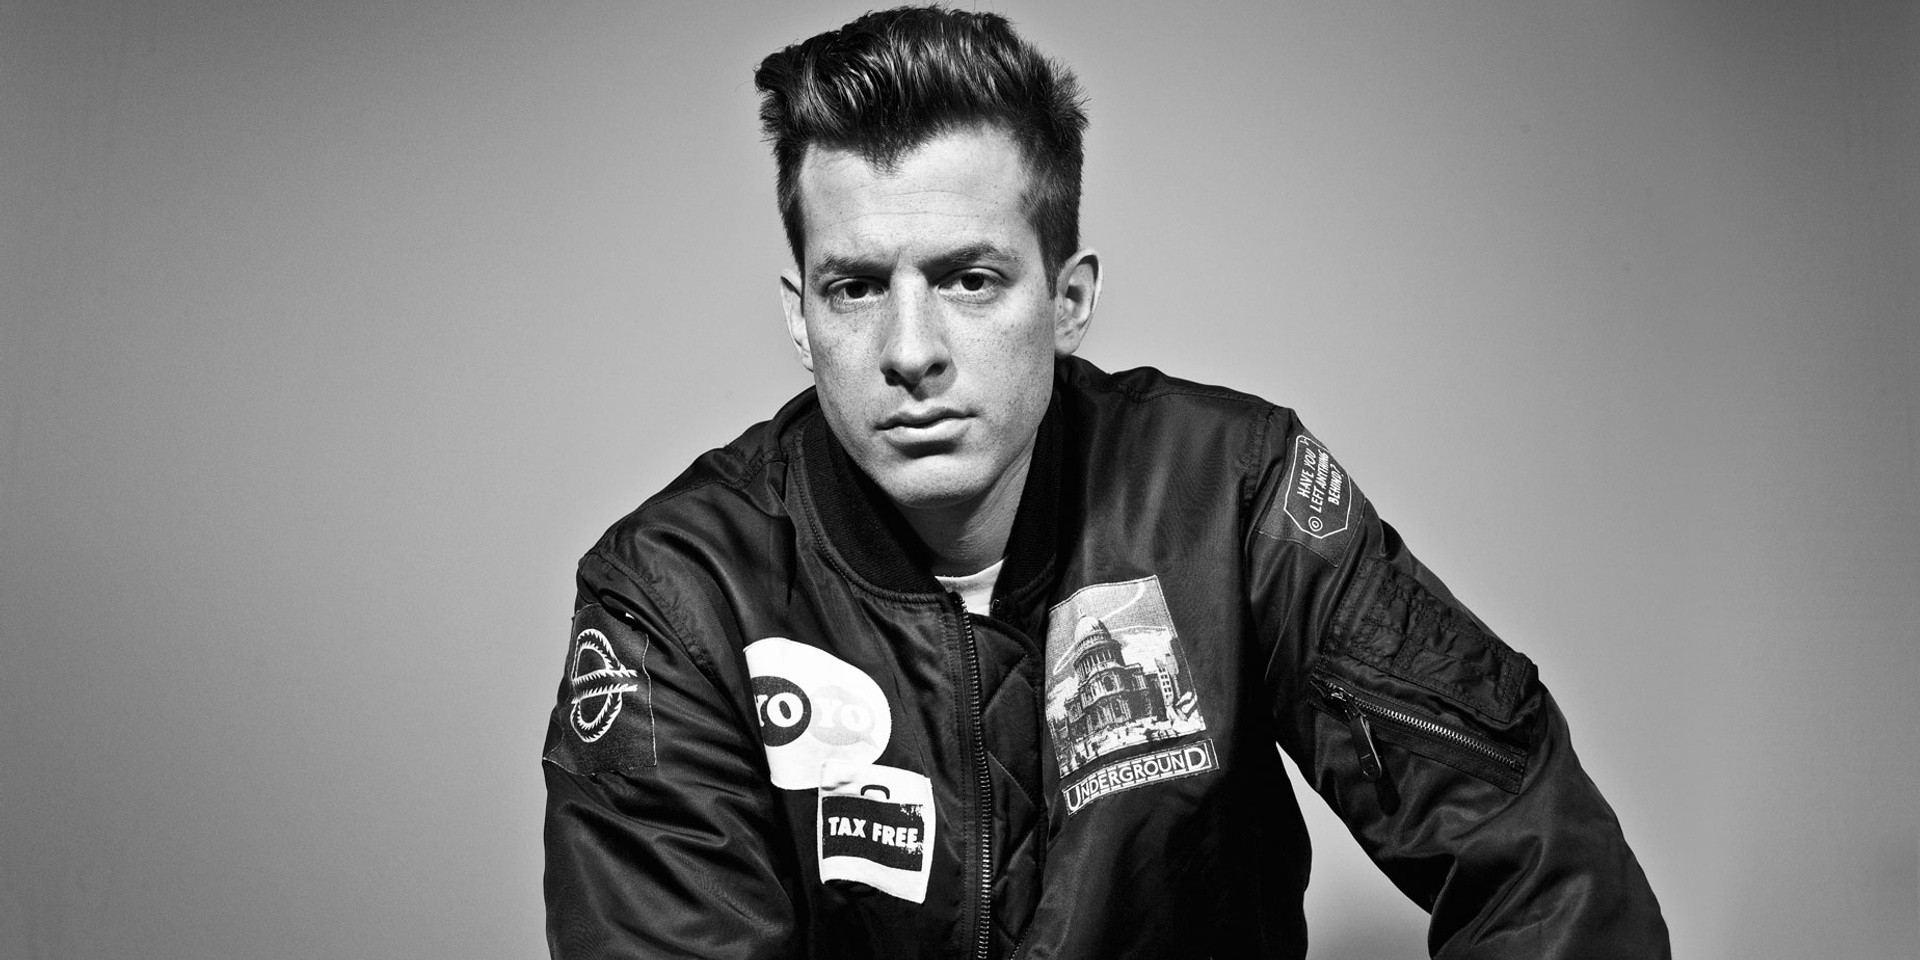 Mark Ronson announces new album, features Miley Cyrus, Lykke Li and more